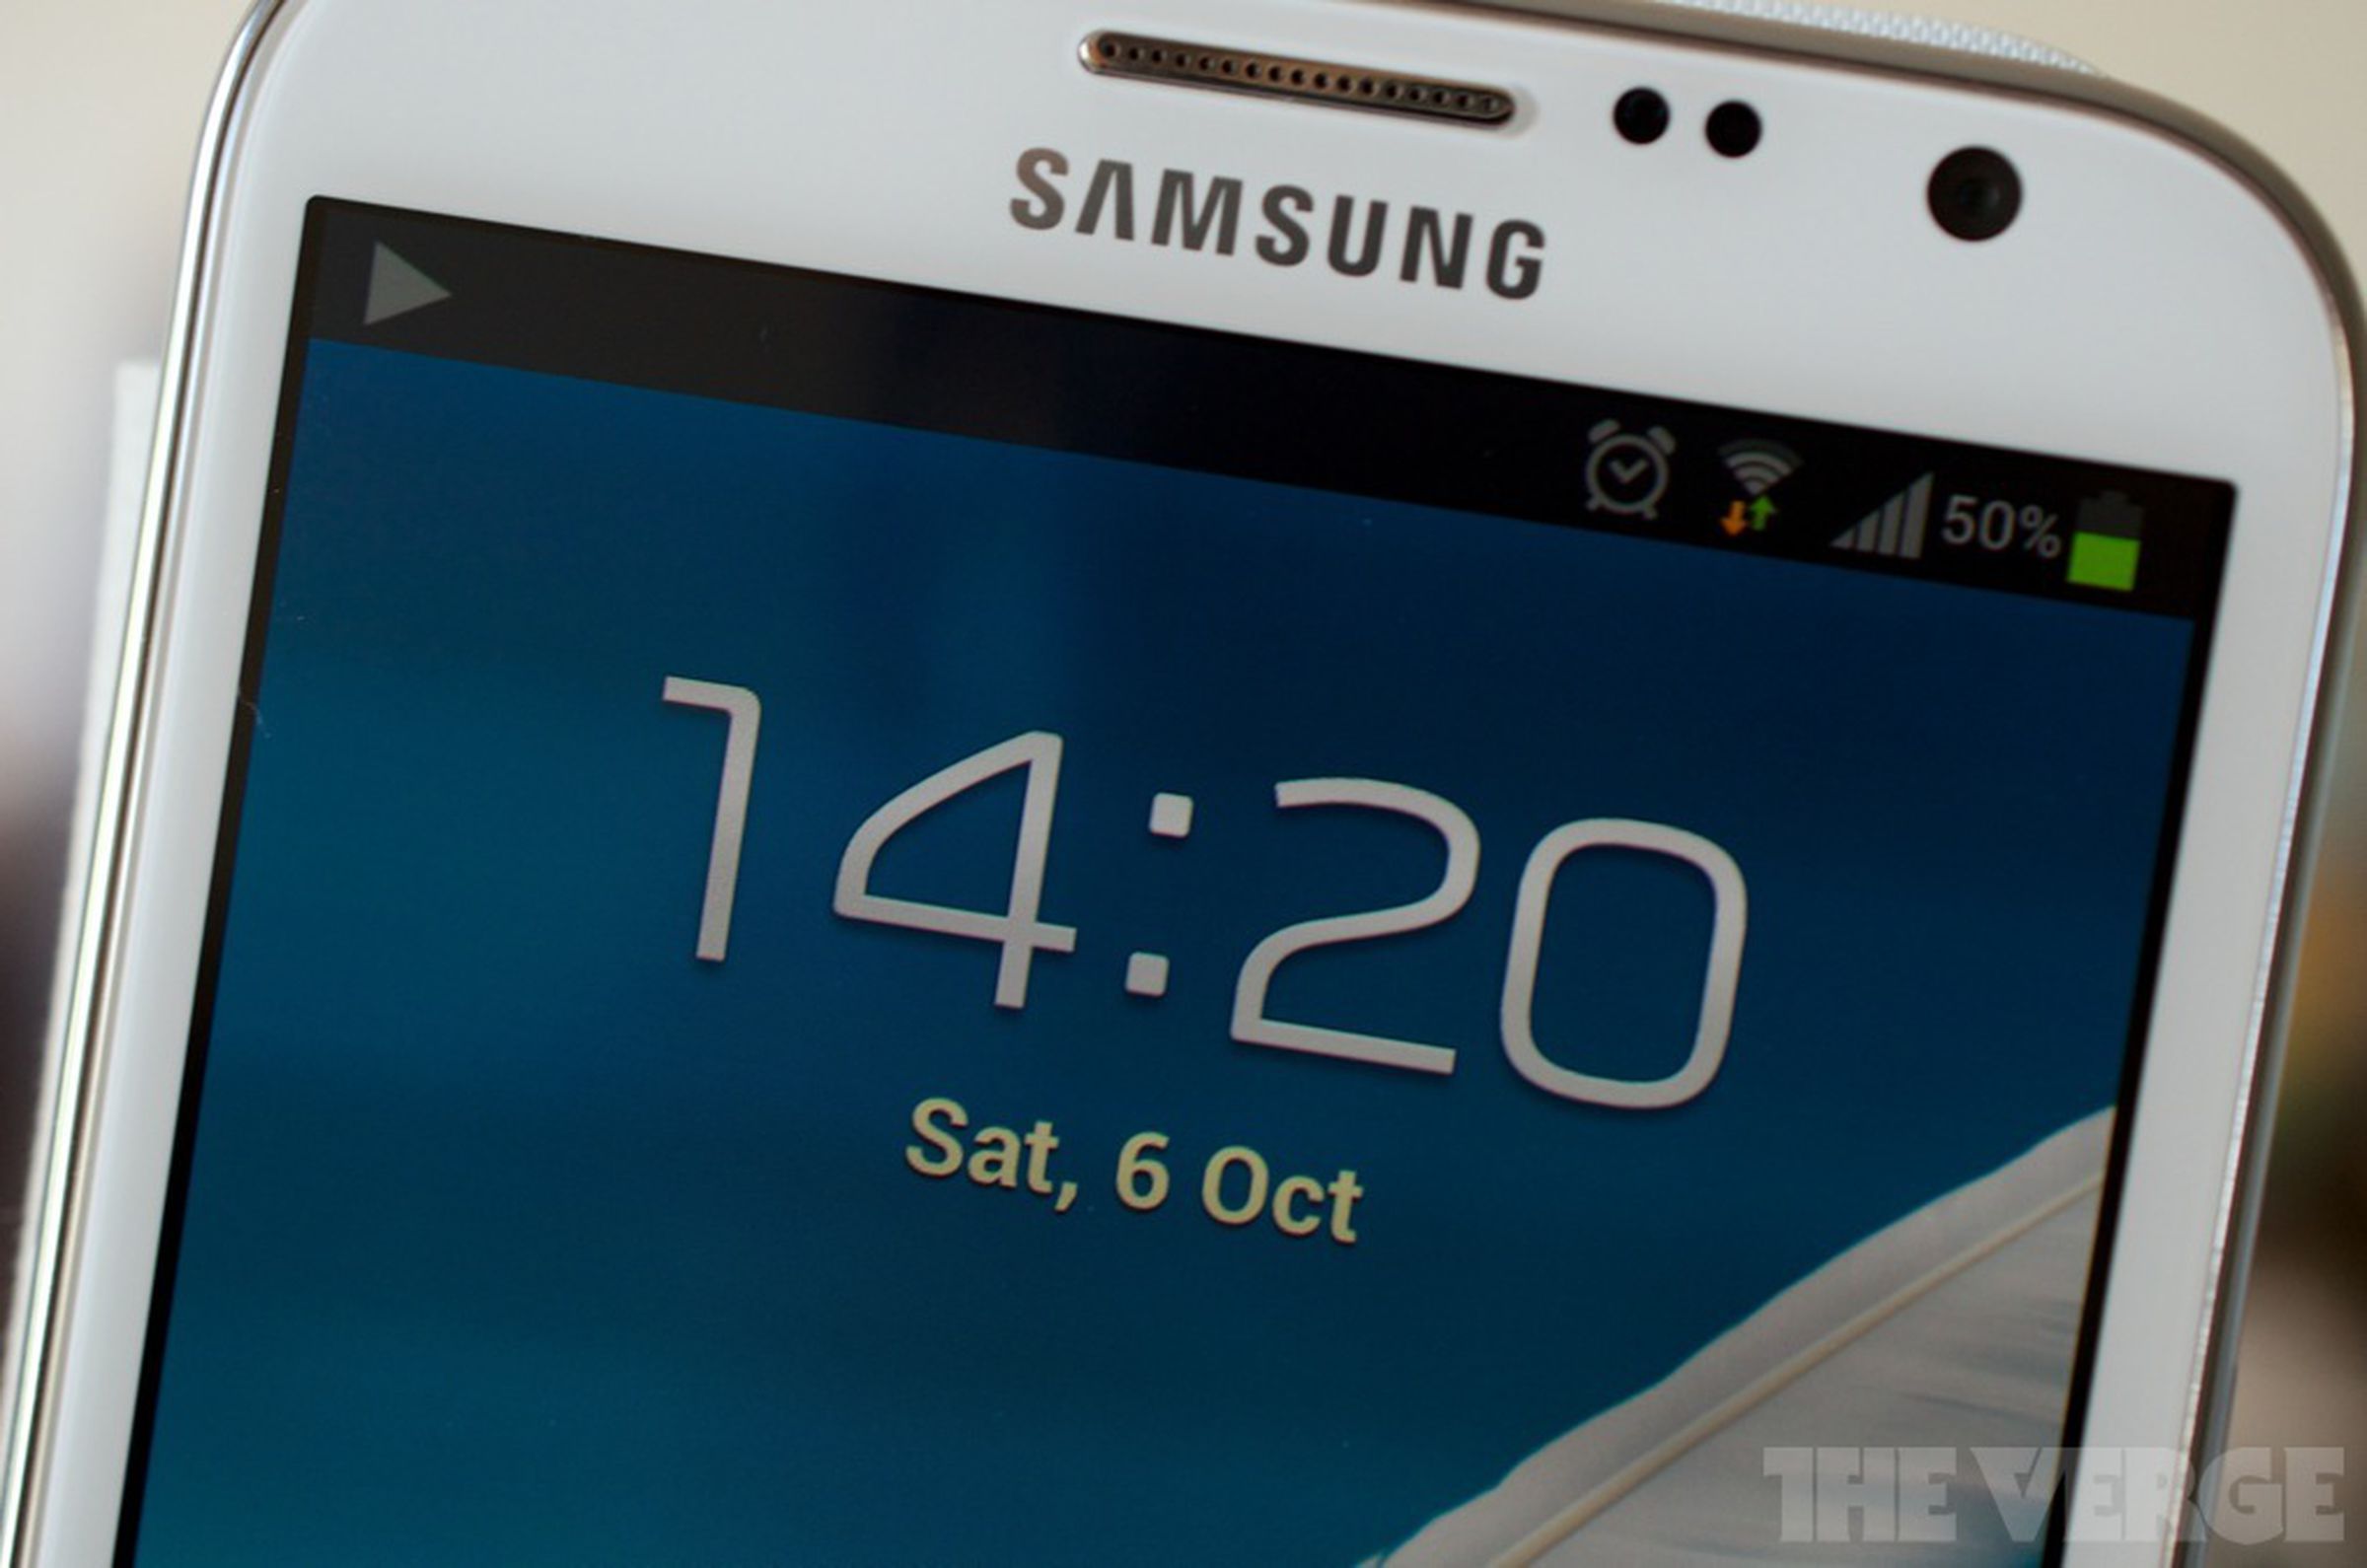 Samsung Galaxy Note II review photos